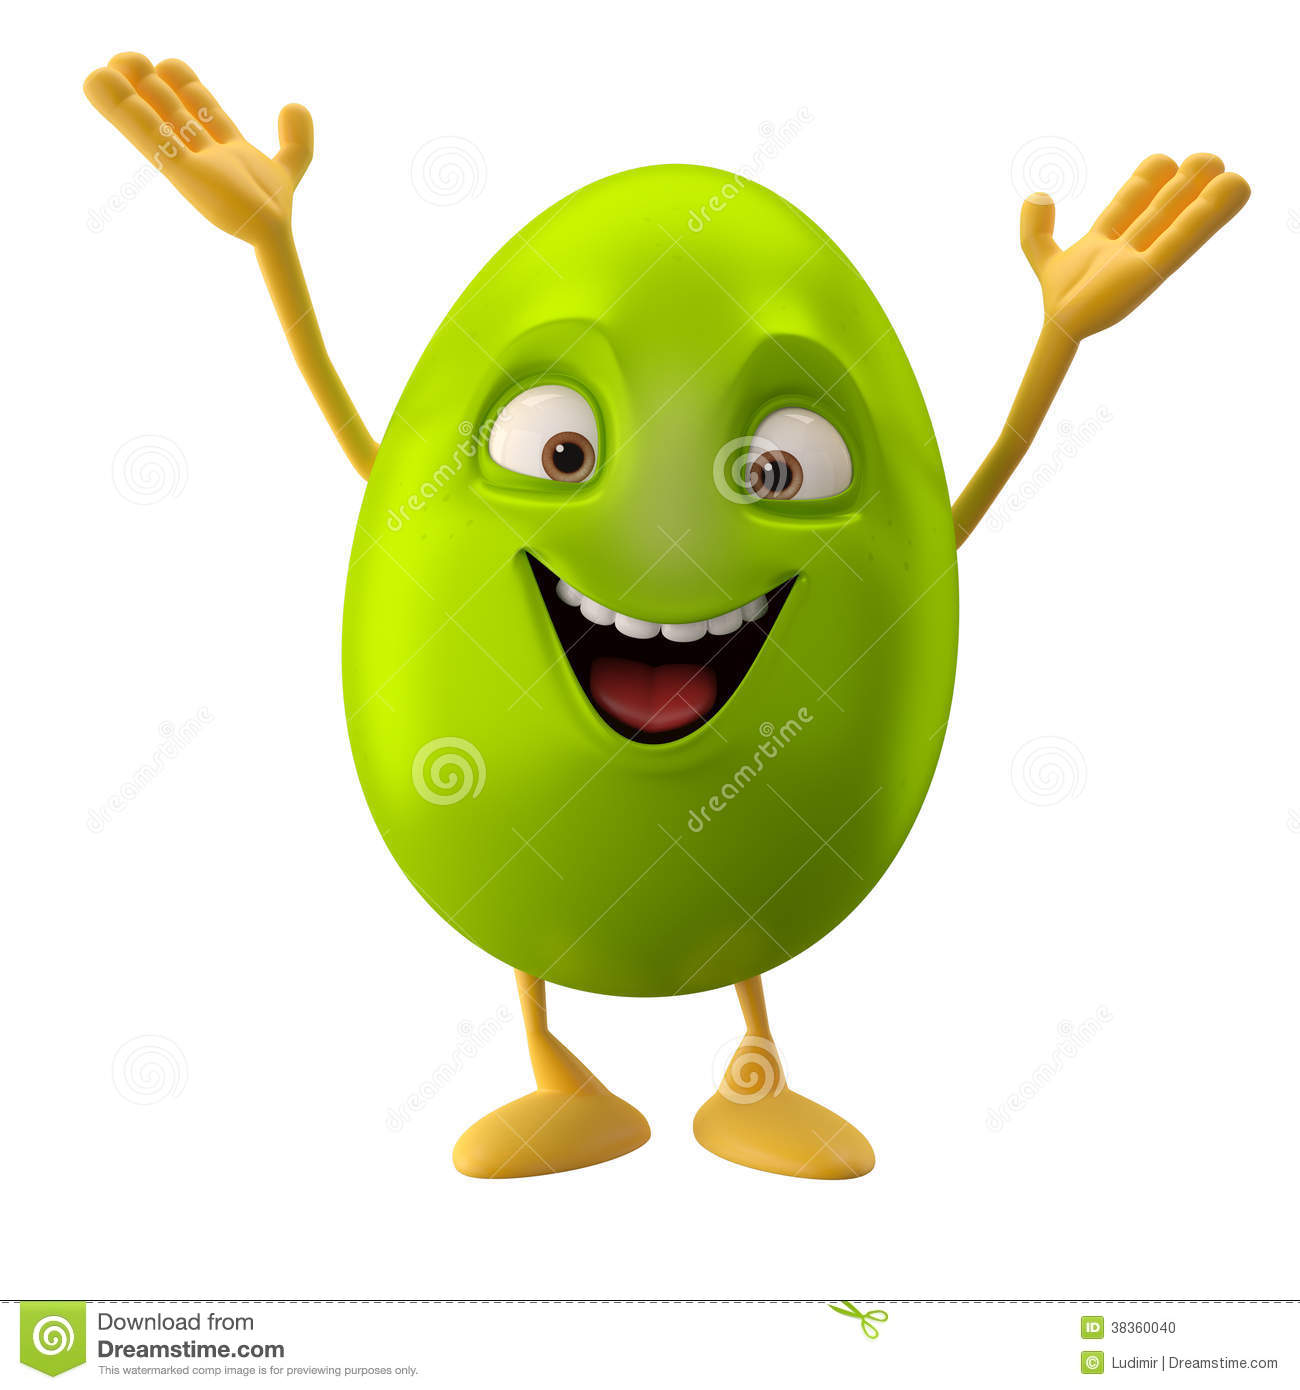 Waving Hands Funny Egg Animated Picture